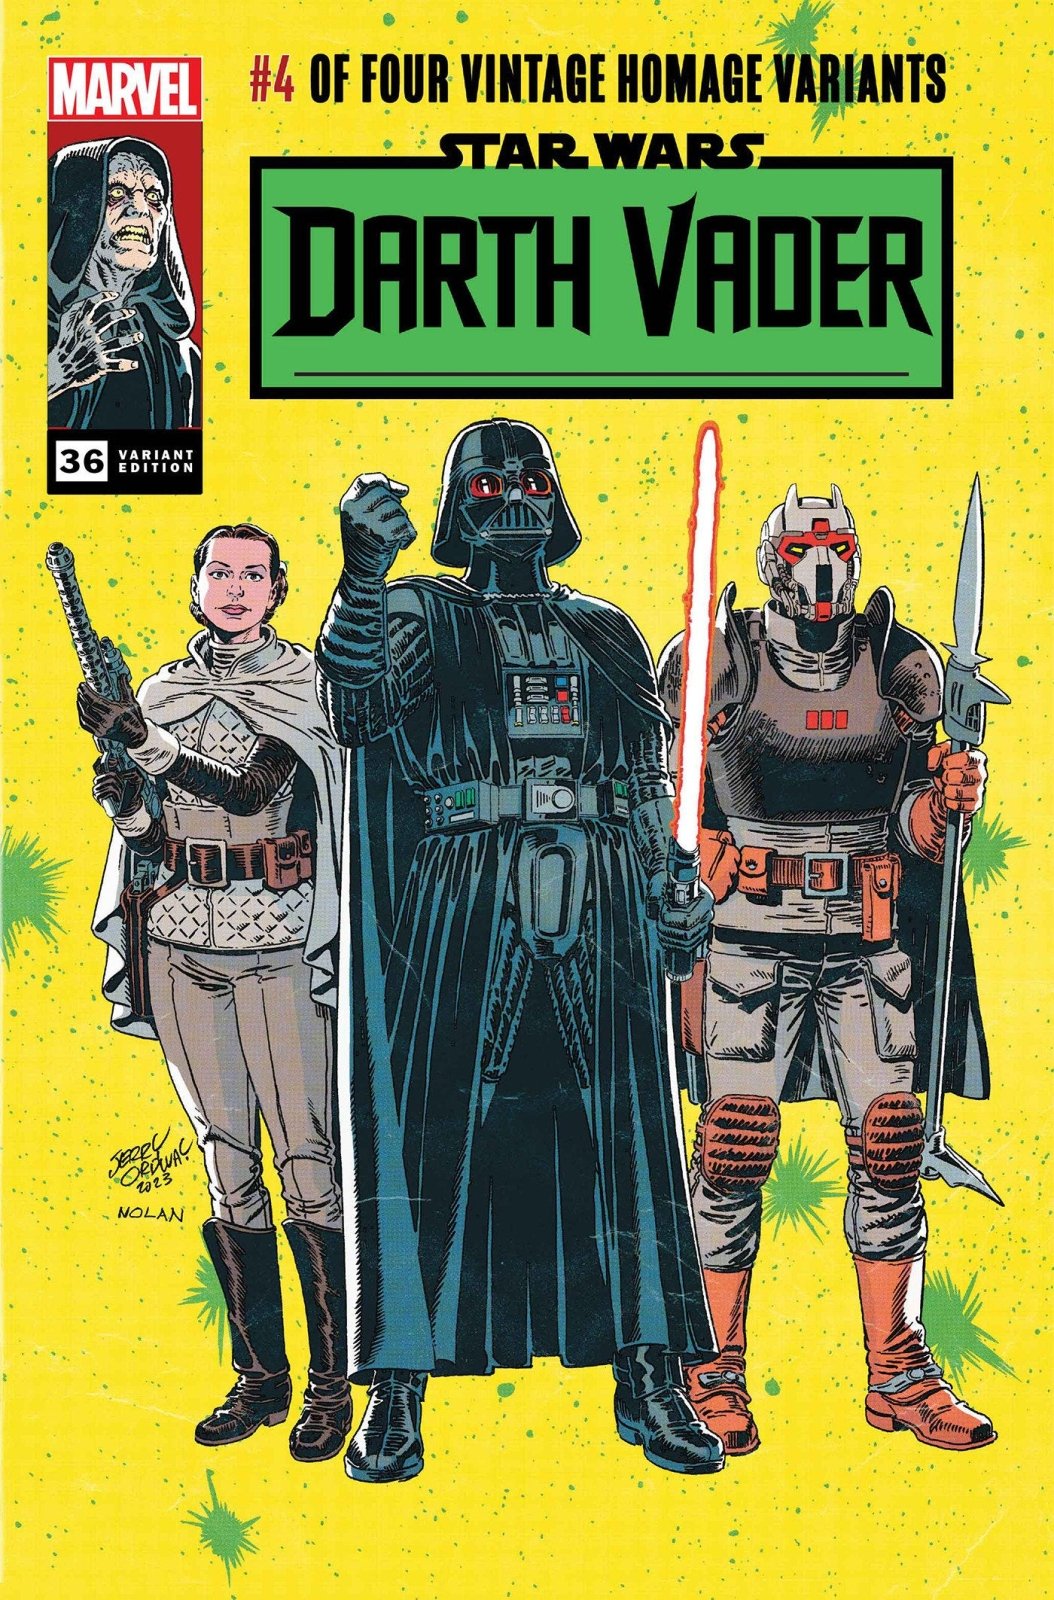 Star Wars: Darth Vader 36 Jerry Ordway Classic Trade Dress Variant - The Fourth Place